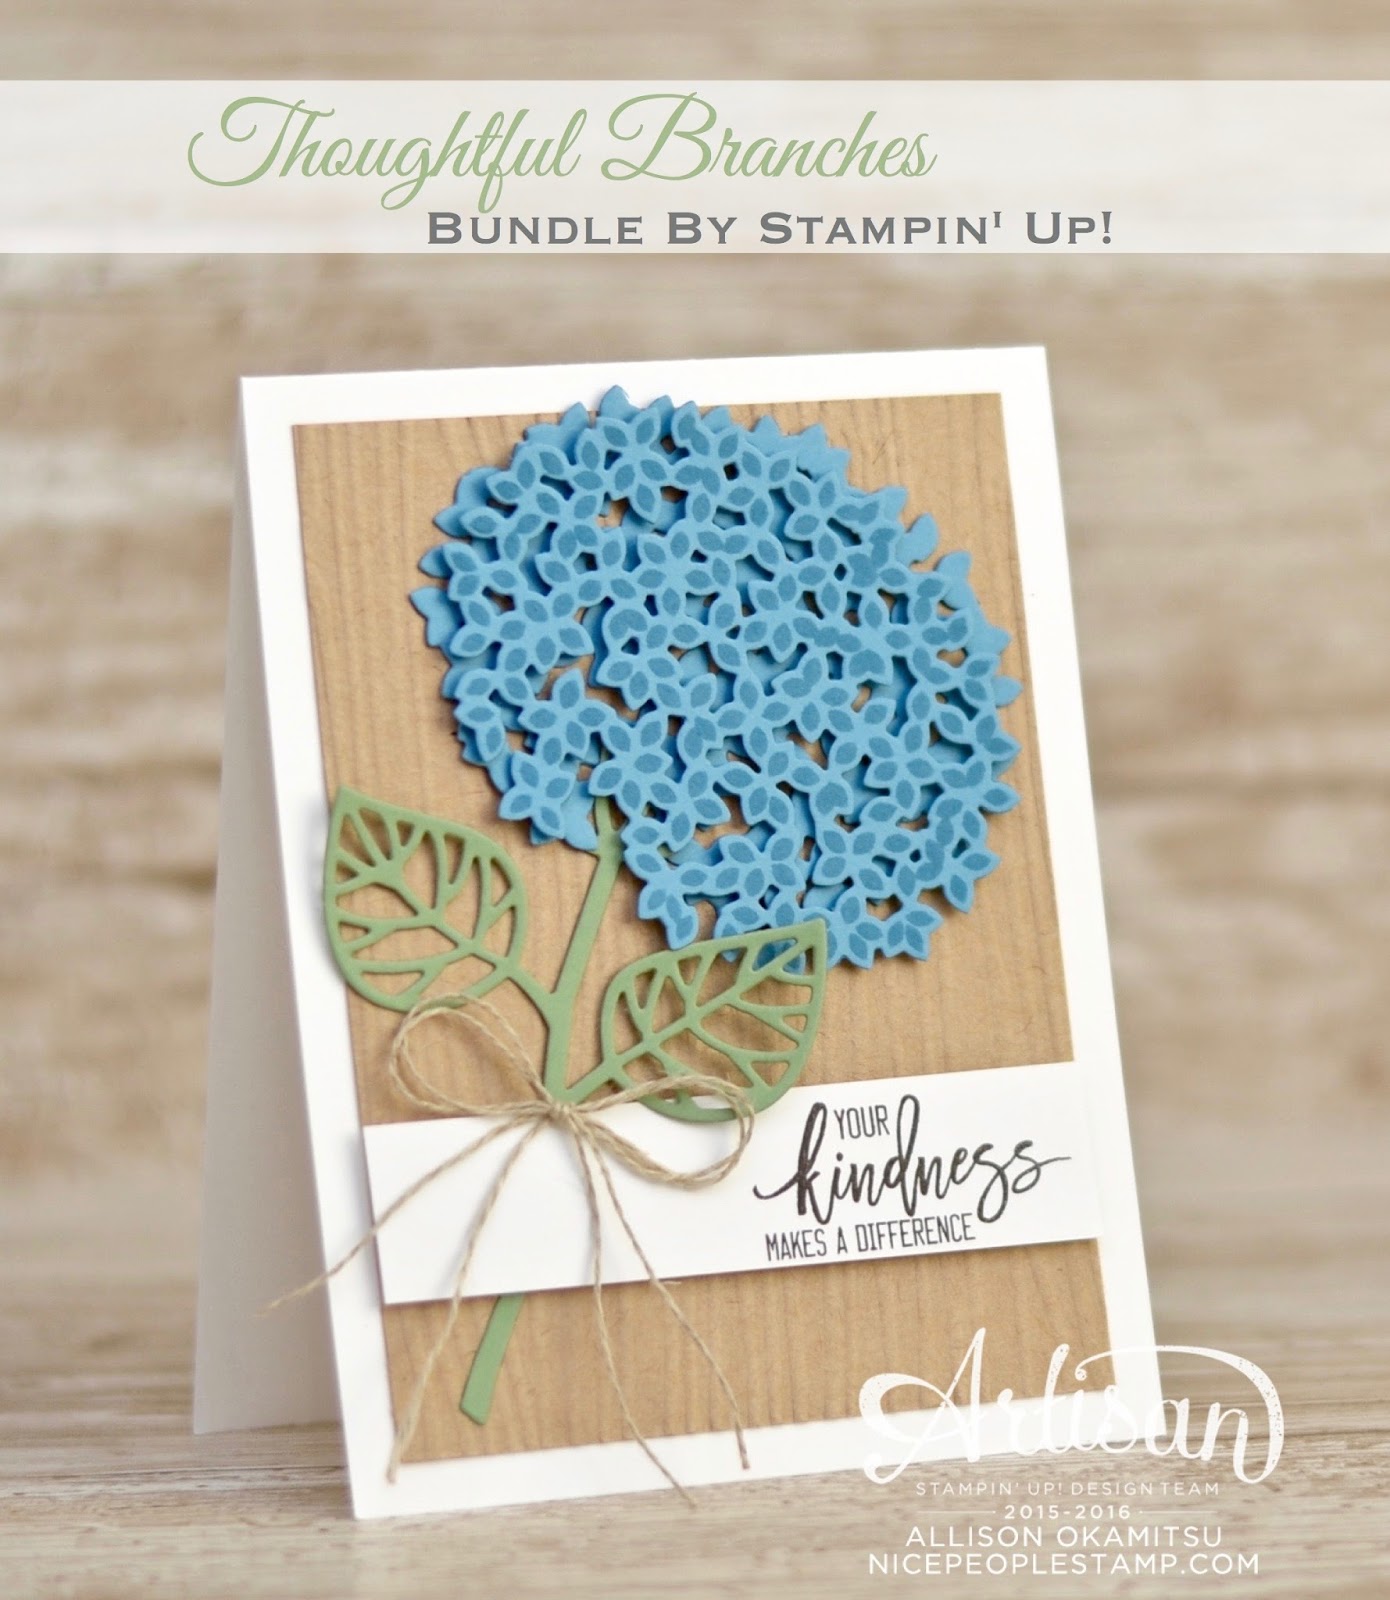 nice people STAMP! - Stampin' Up! Canada: Thoughtful ...
